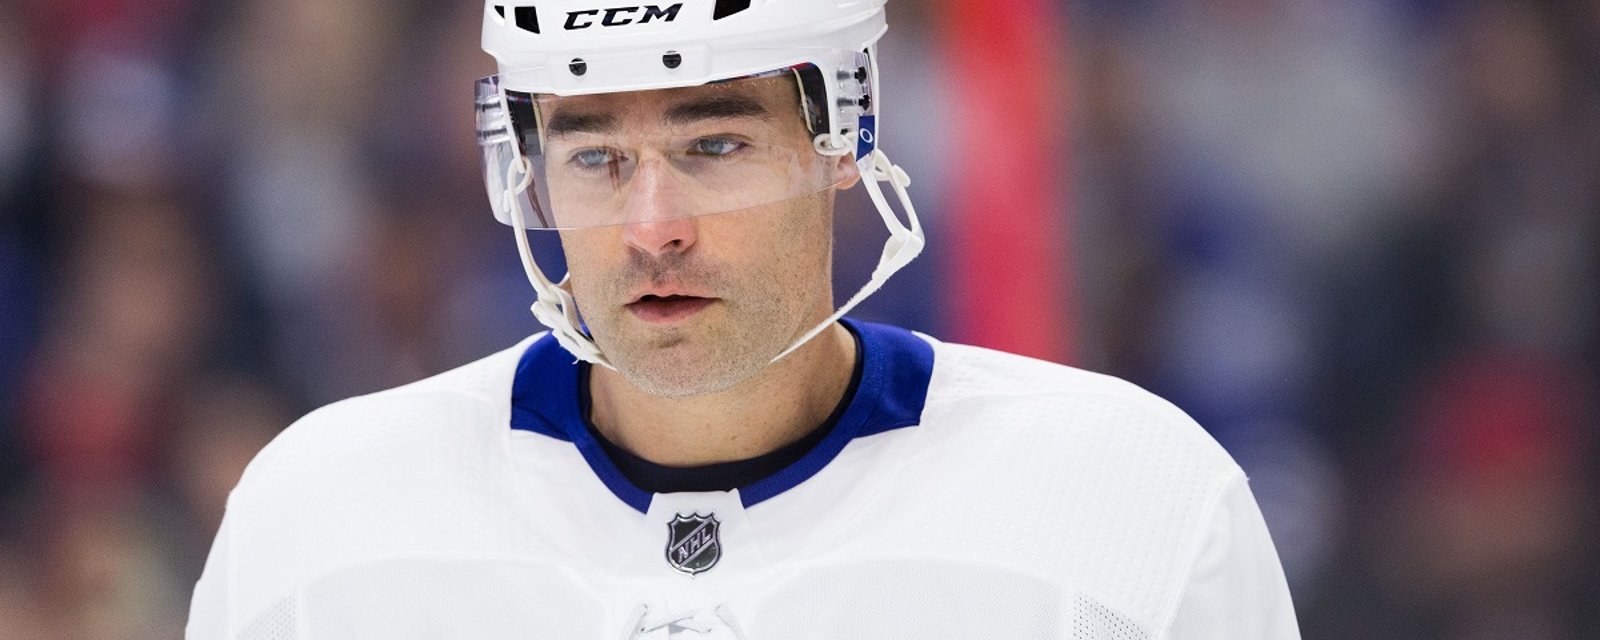 Rumor: The San Jose Sharks want nothing to do with Patrick Marleau.